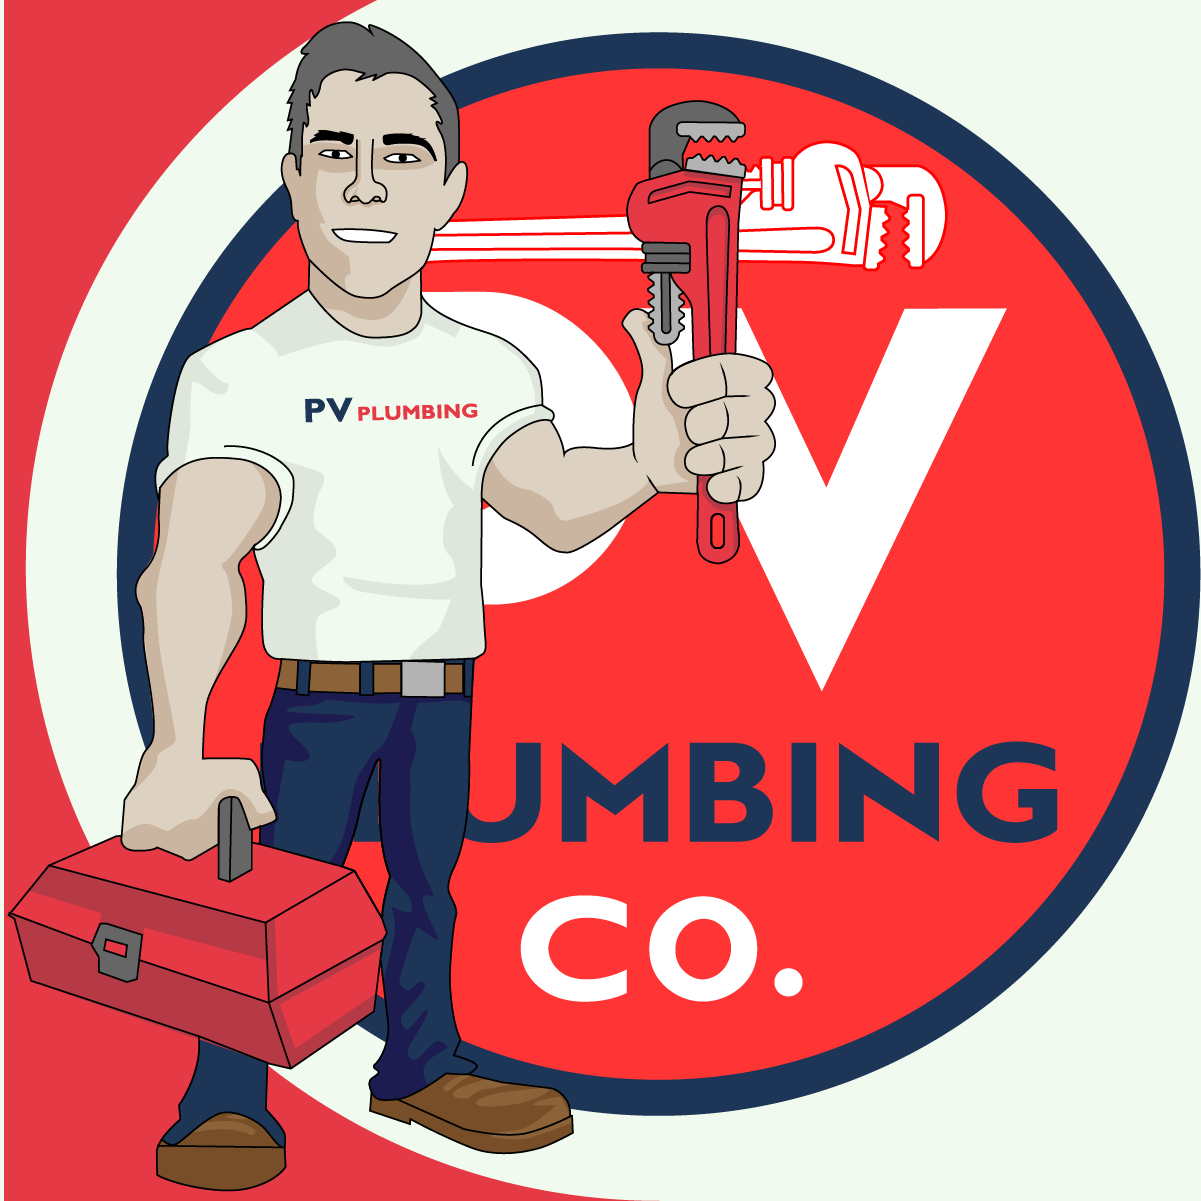 PV Plumbing a new website and marketing customer for Blue View Studios